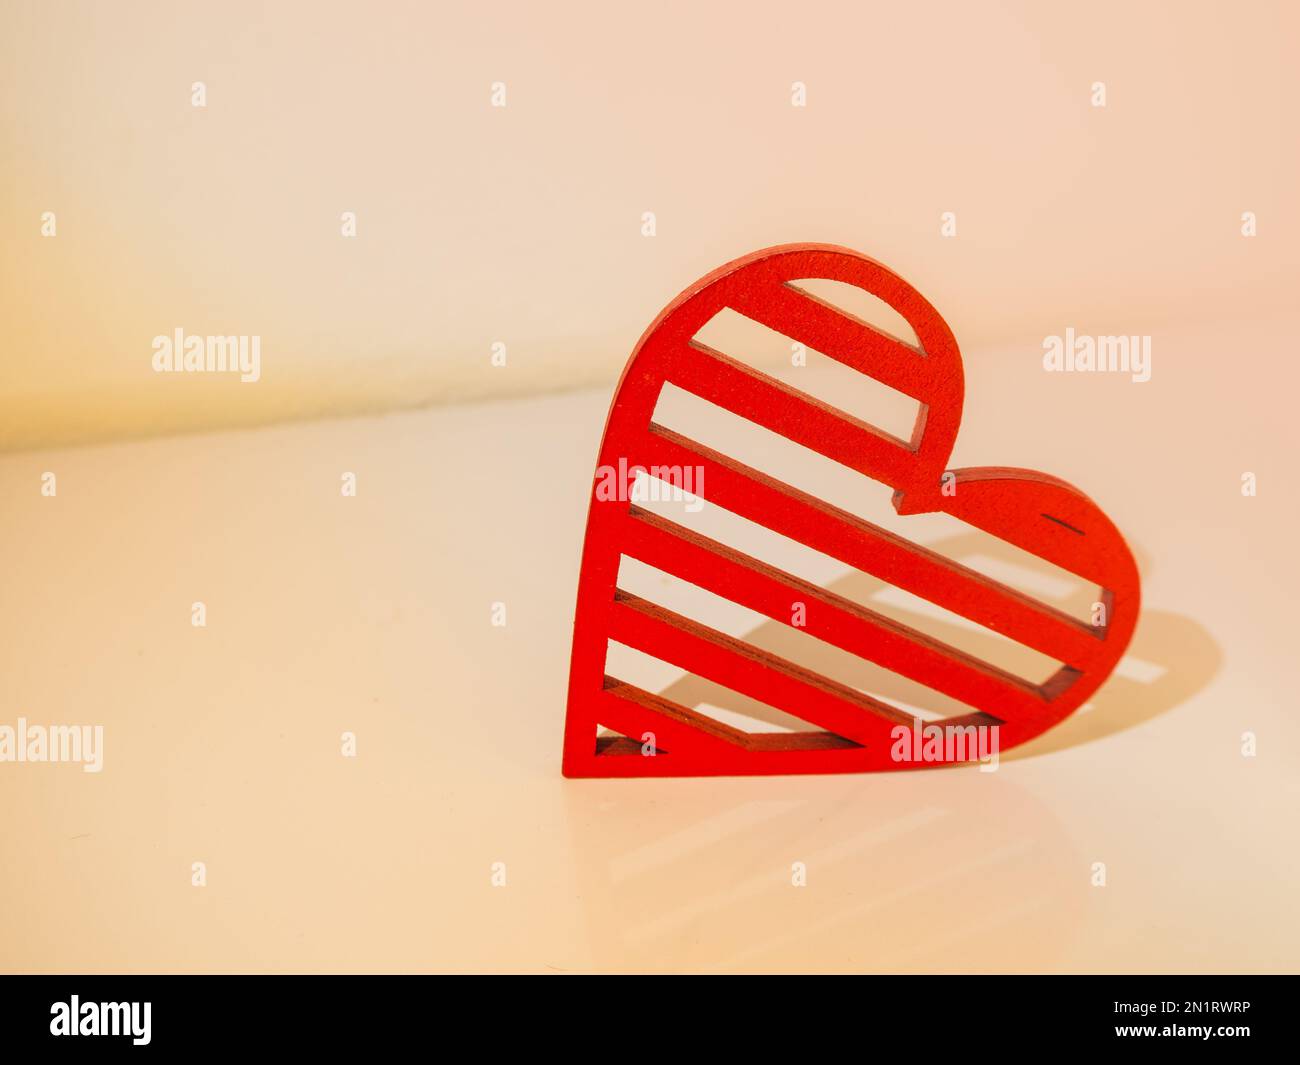 Border frame from red origami paper hearts on gray background. Valentine's  Day absctract. Symbol of love. Copy space, flat lay Stock Photo - Alamy